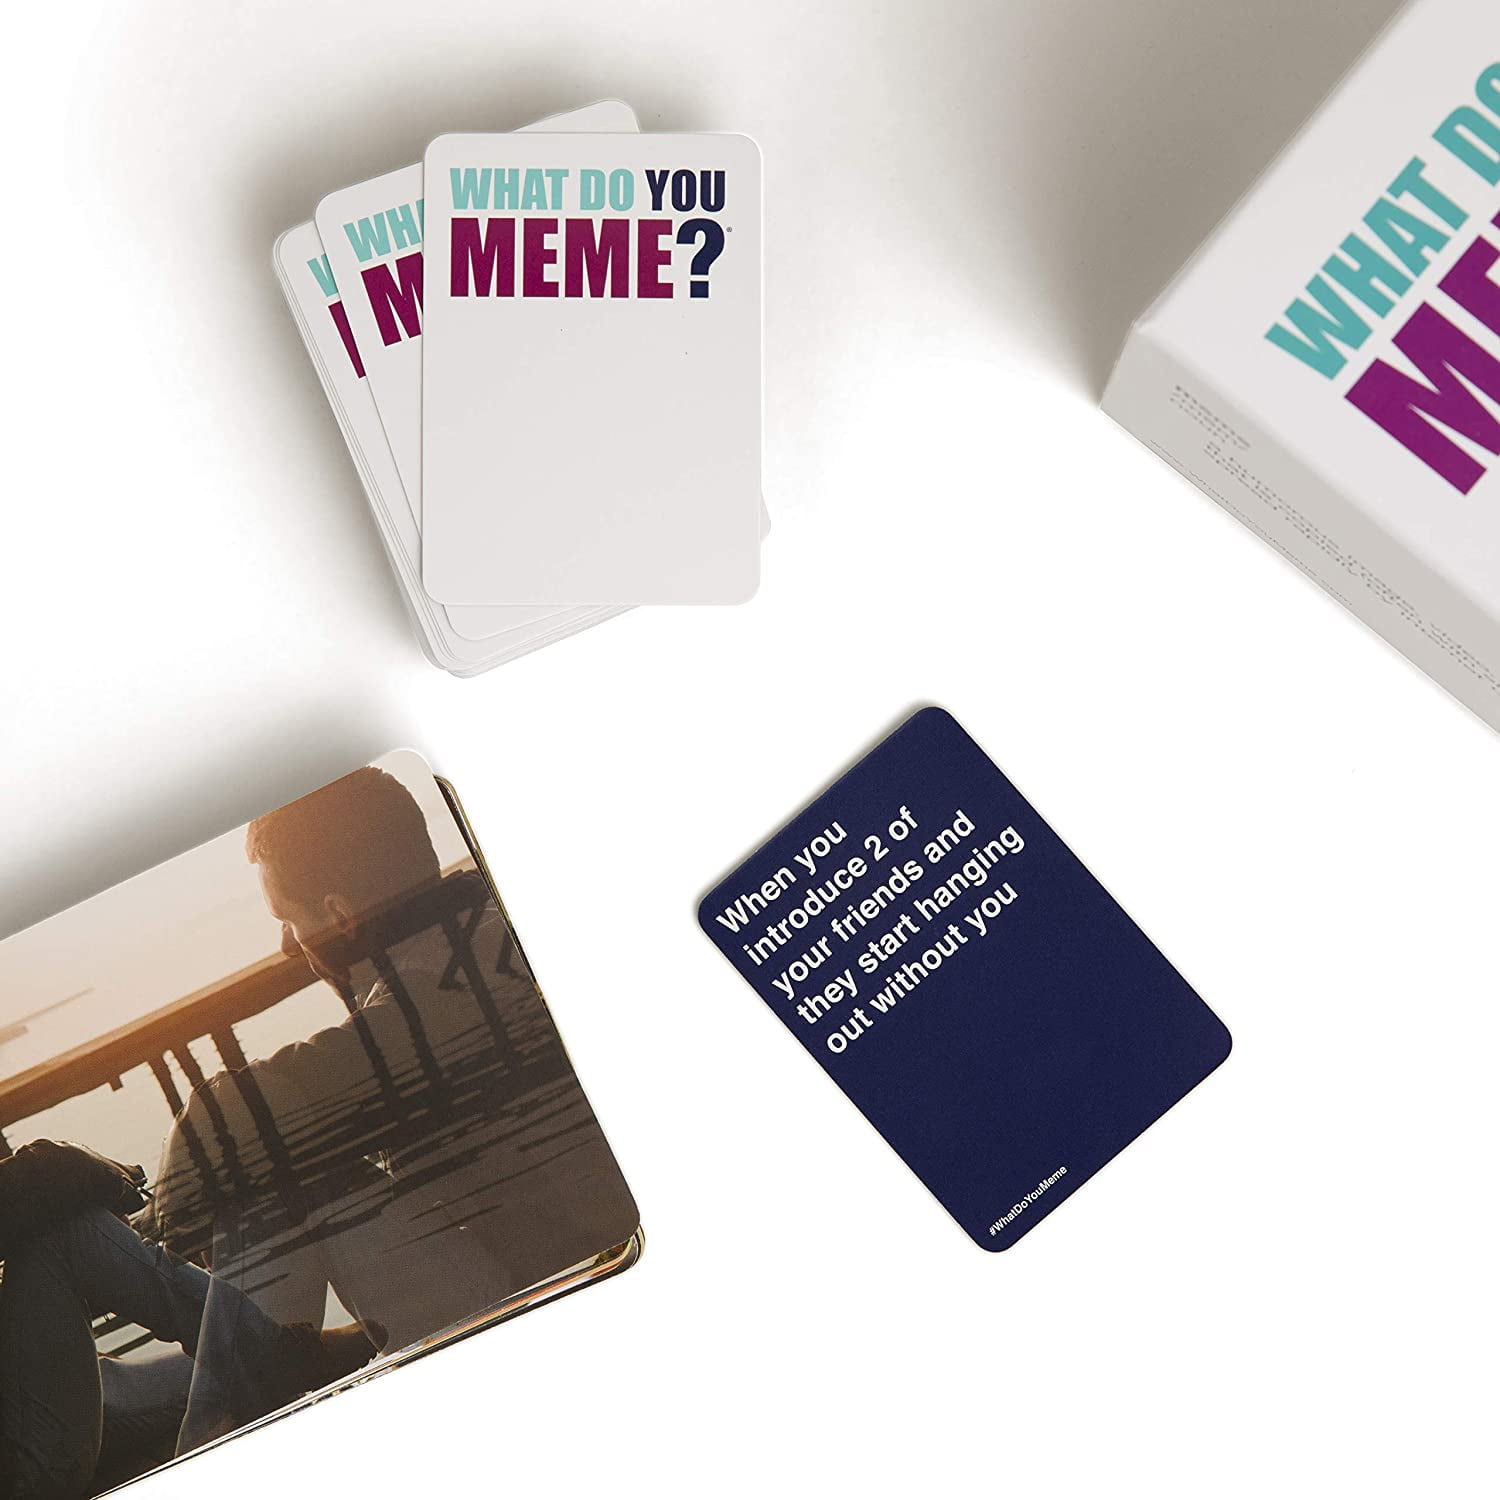 What Do You Meme Adult Party Game BSFW Edition FREE SHIPPING 